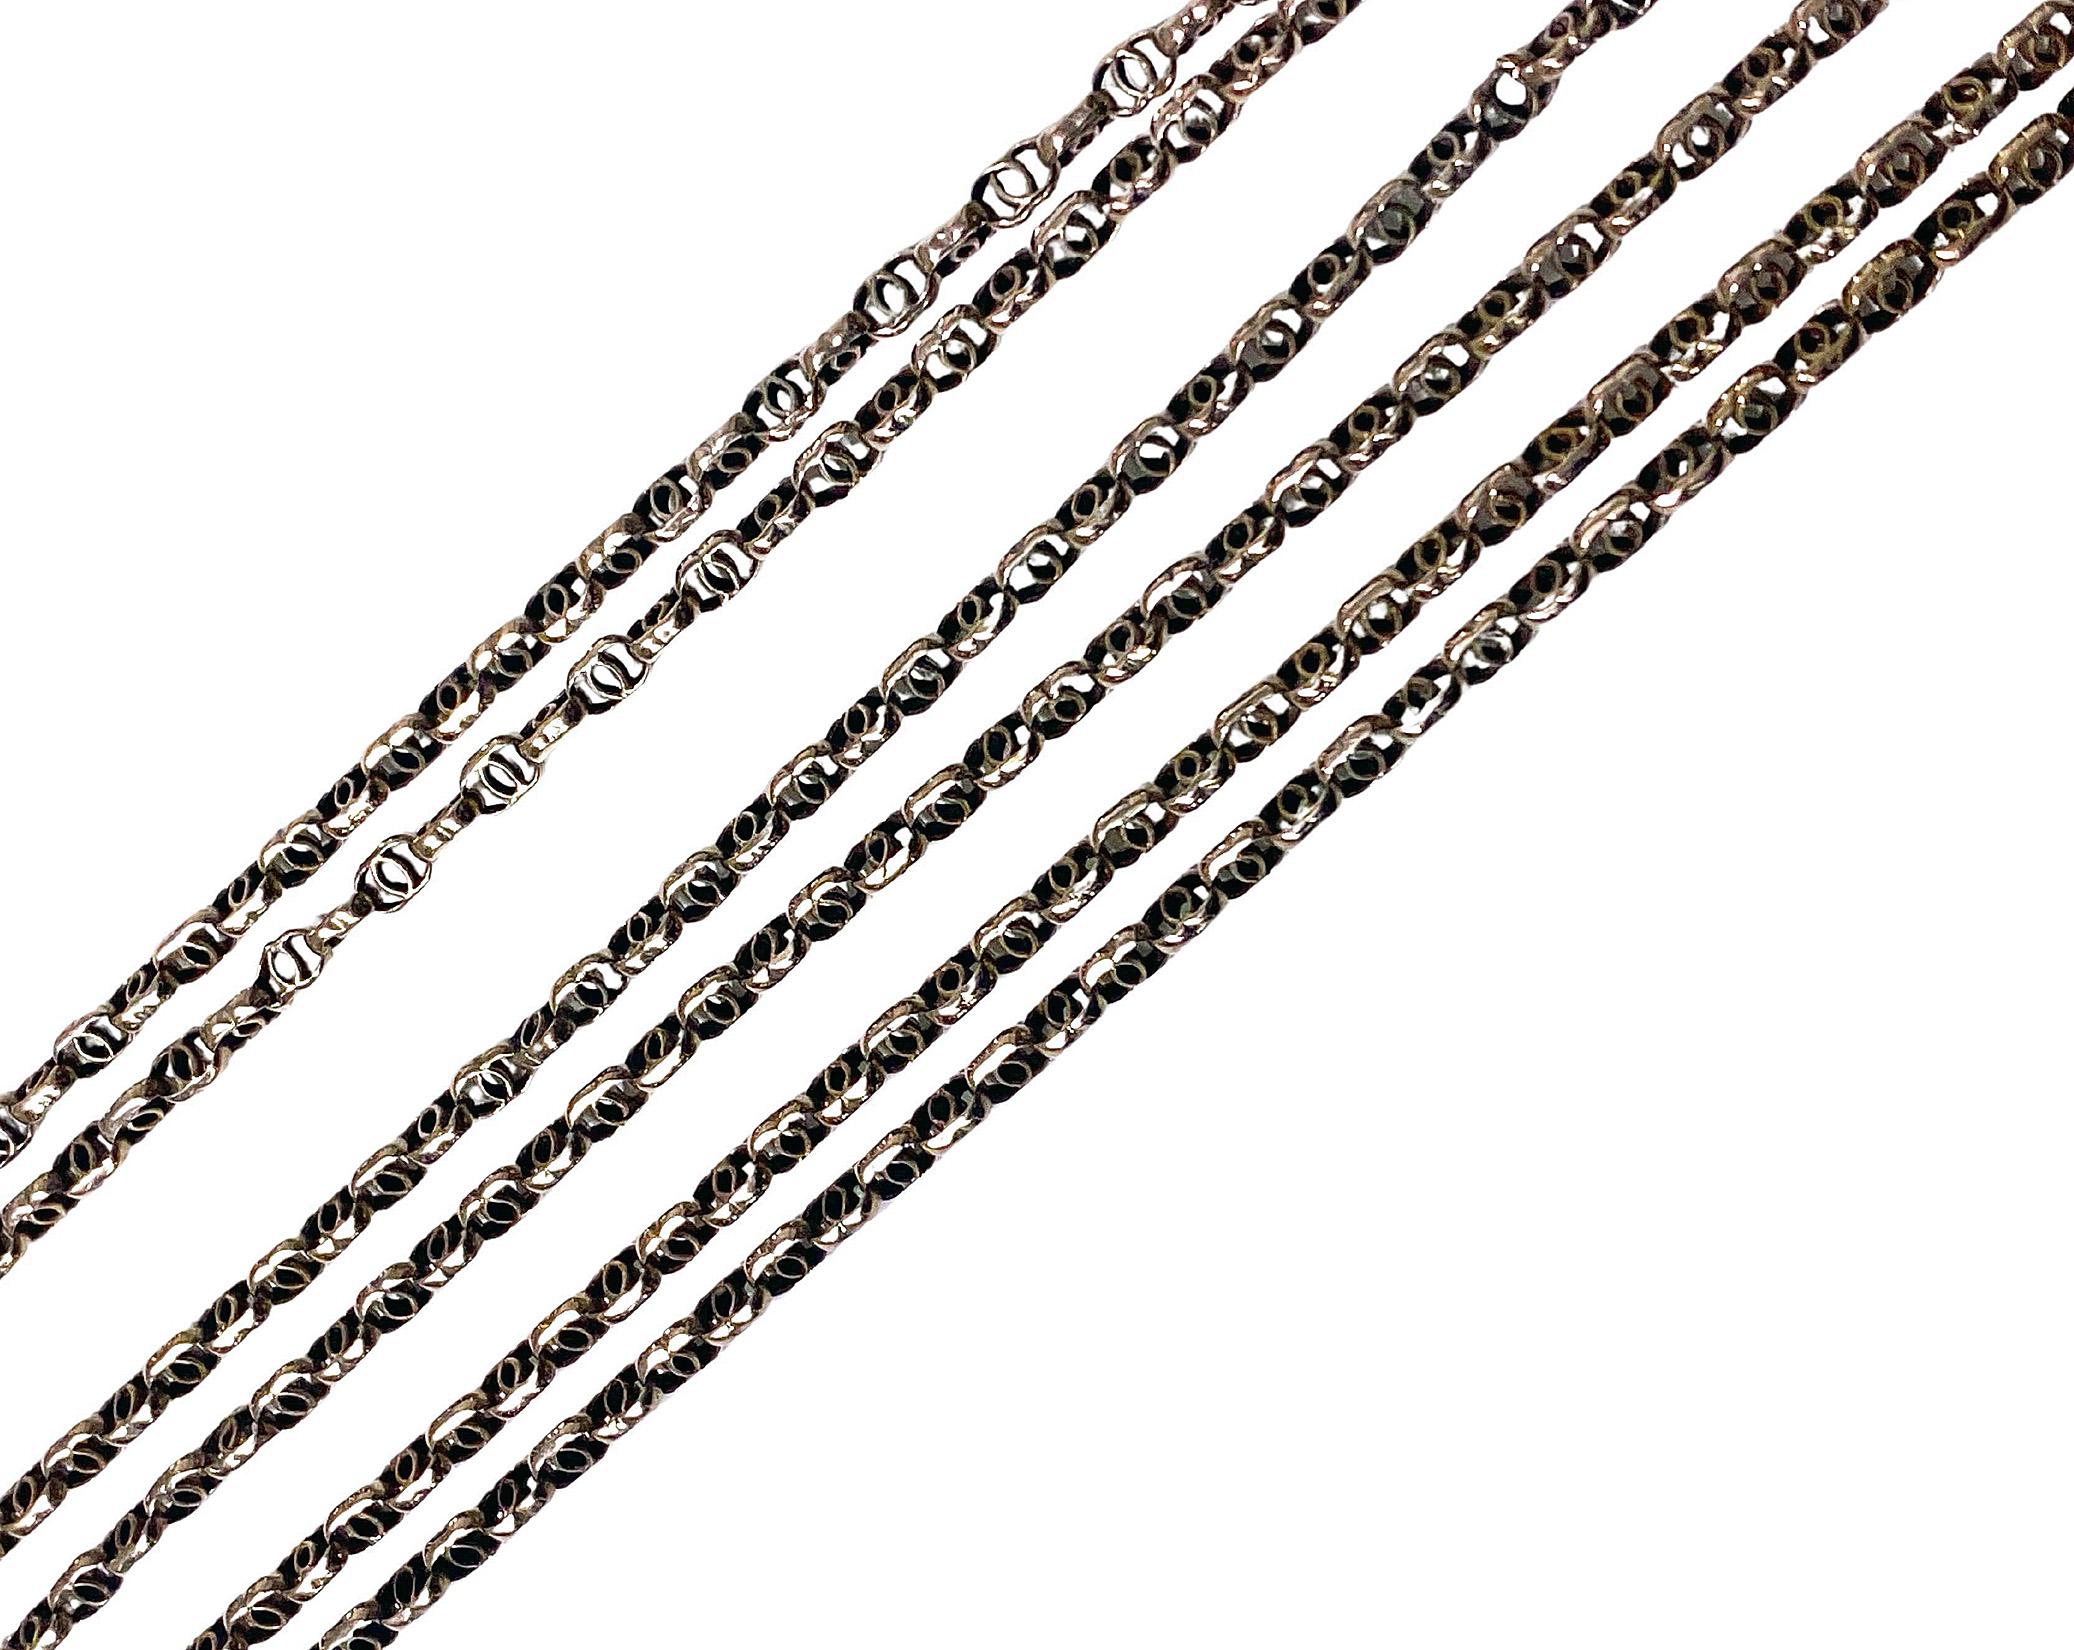 Antique 19th century Muff Chain, English C.1890. The 9ct chain with intertwining open links, suspending gold swivel stamped 9ct. Length approximately: 56 inches. Weight: 19.8 gm.